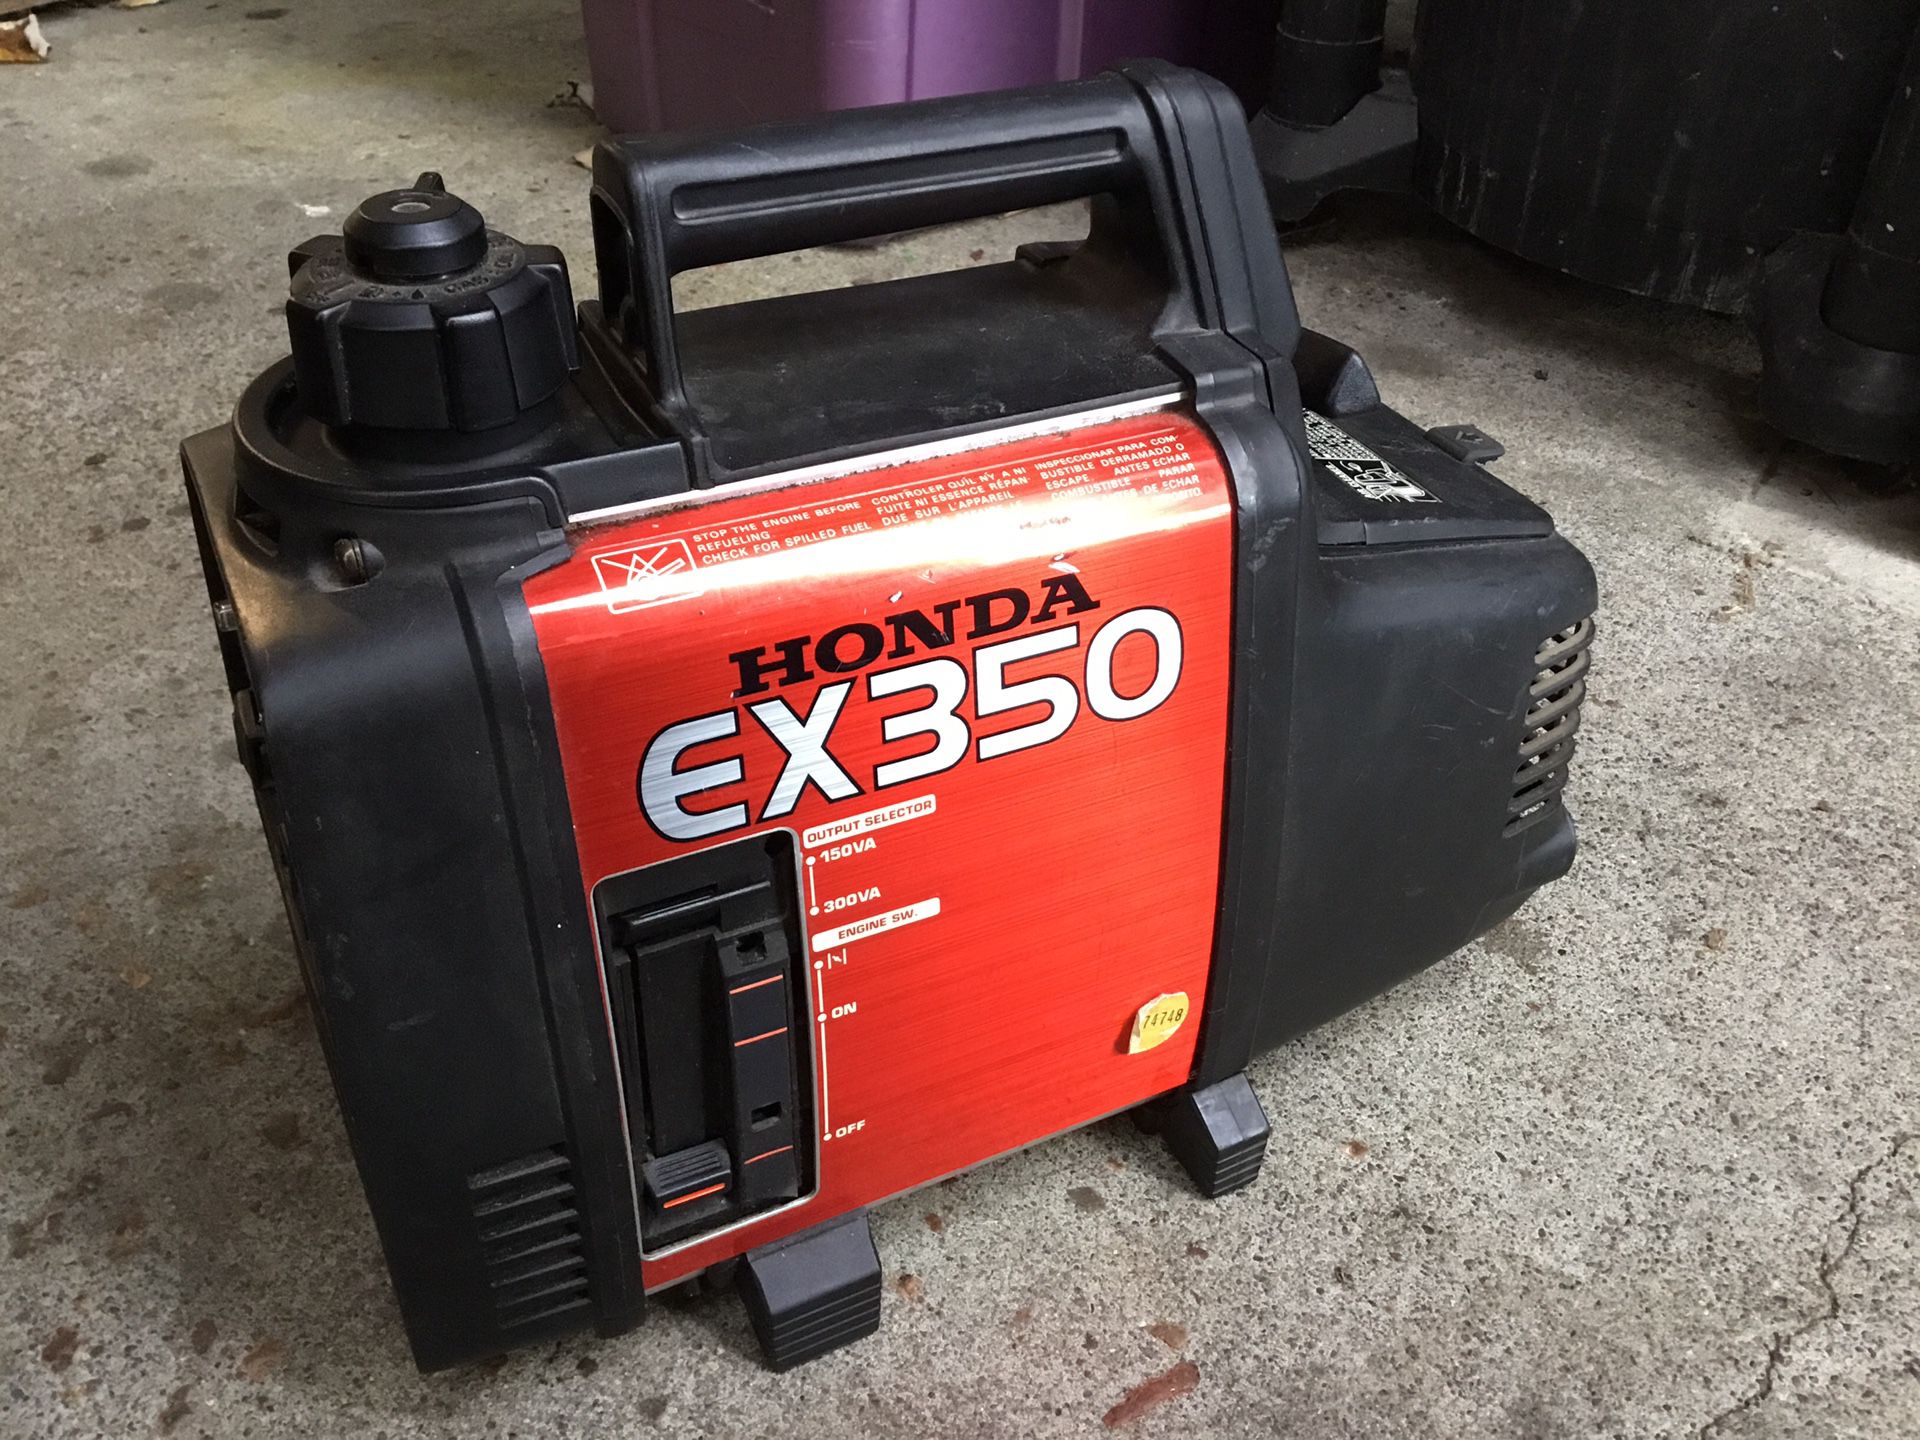 EX350 Generator for Sale in WA OfferUp